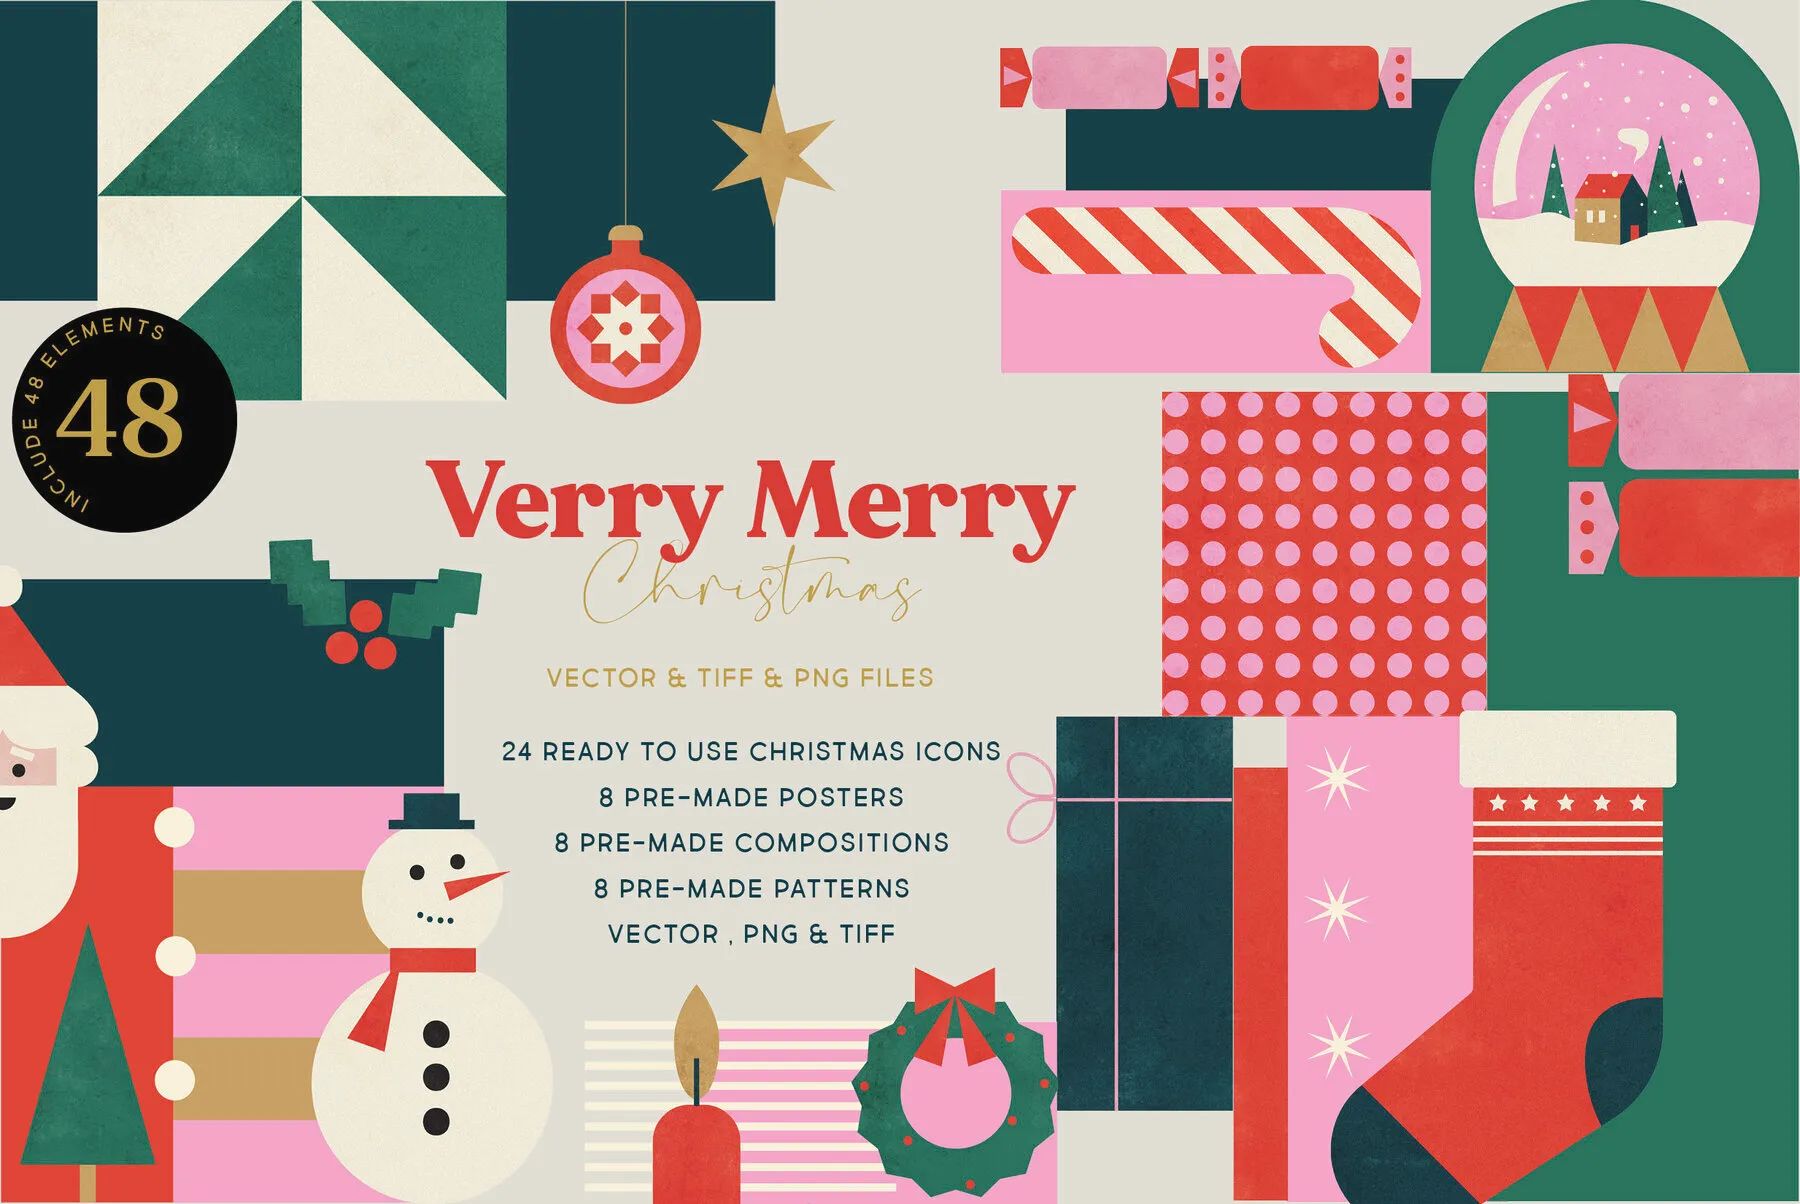 Verry Merry Christmas Illustrations